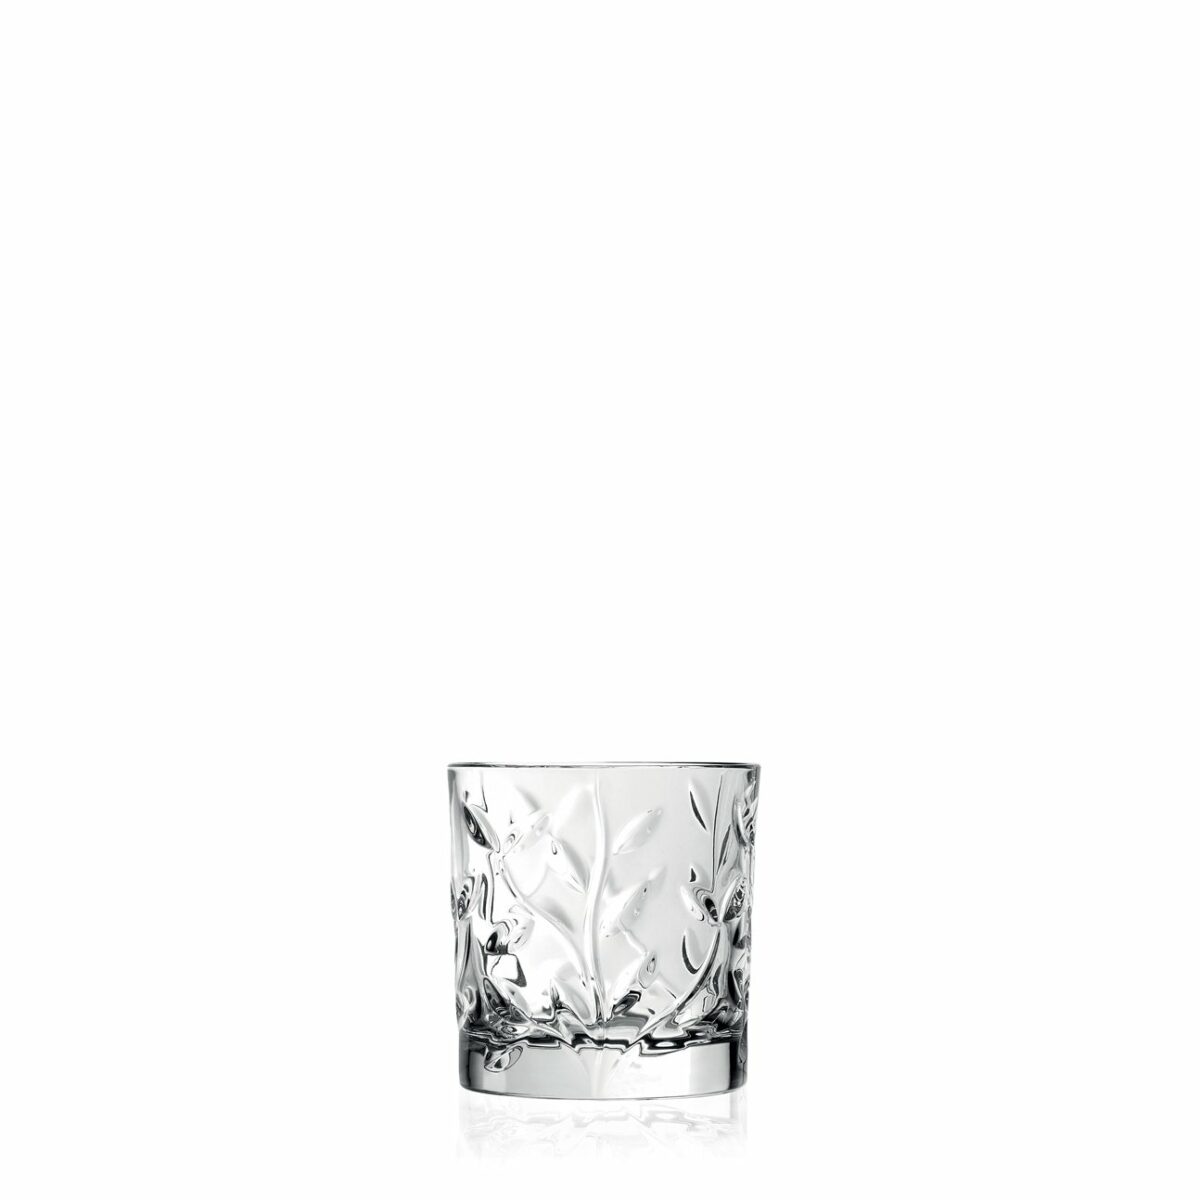 Whiskey Glass 33 Cl Laurus - Set Of 6